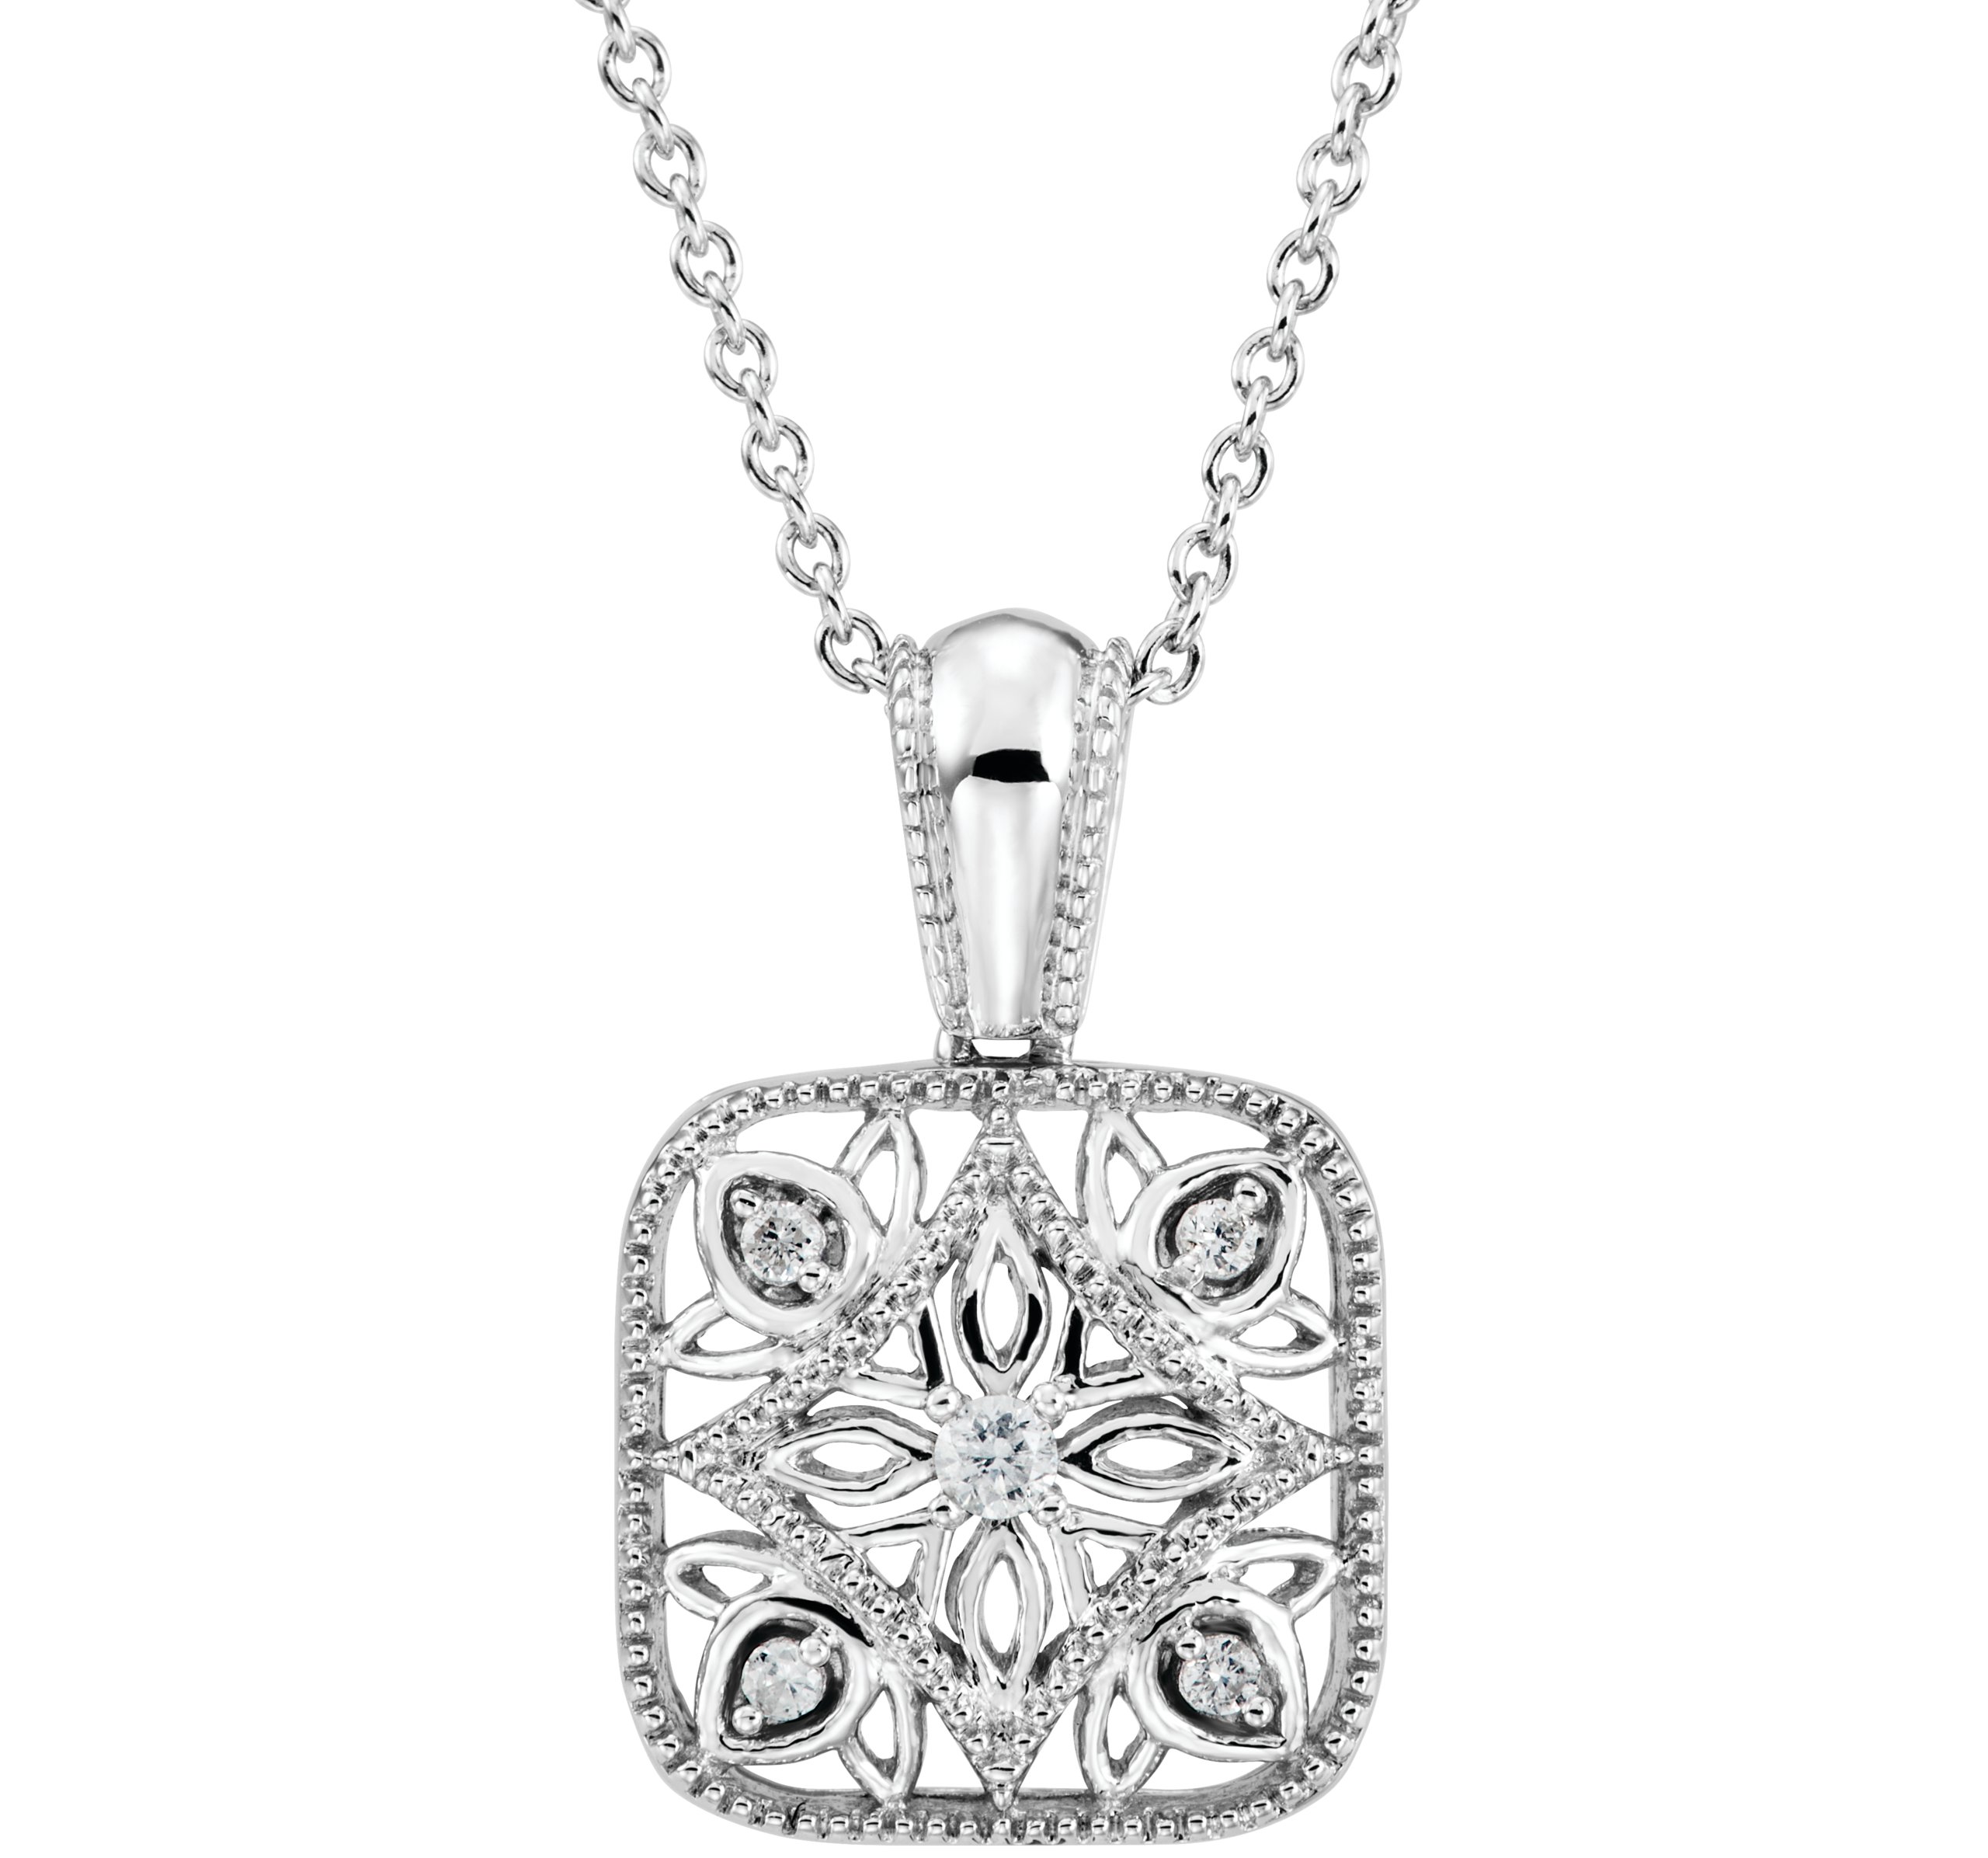 Sterling Silver .05 CTW Diamond Accented 18 inch Necklace Ref. 2994732